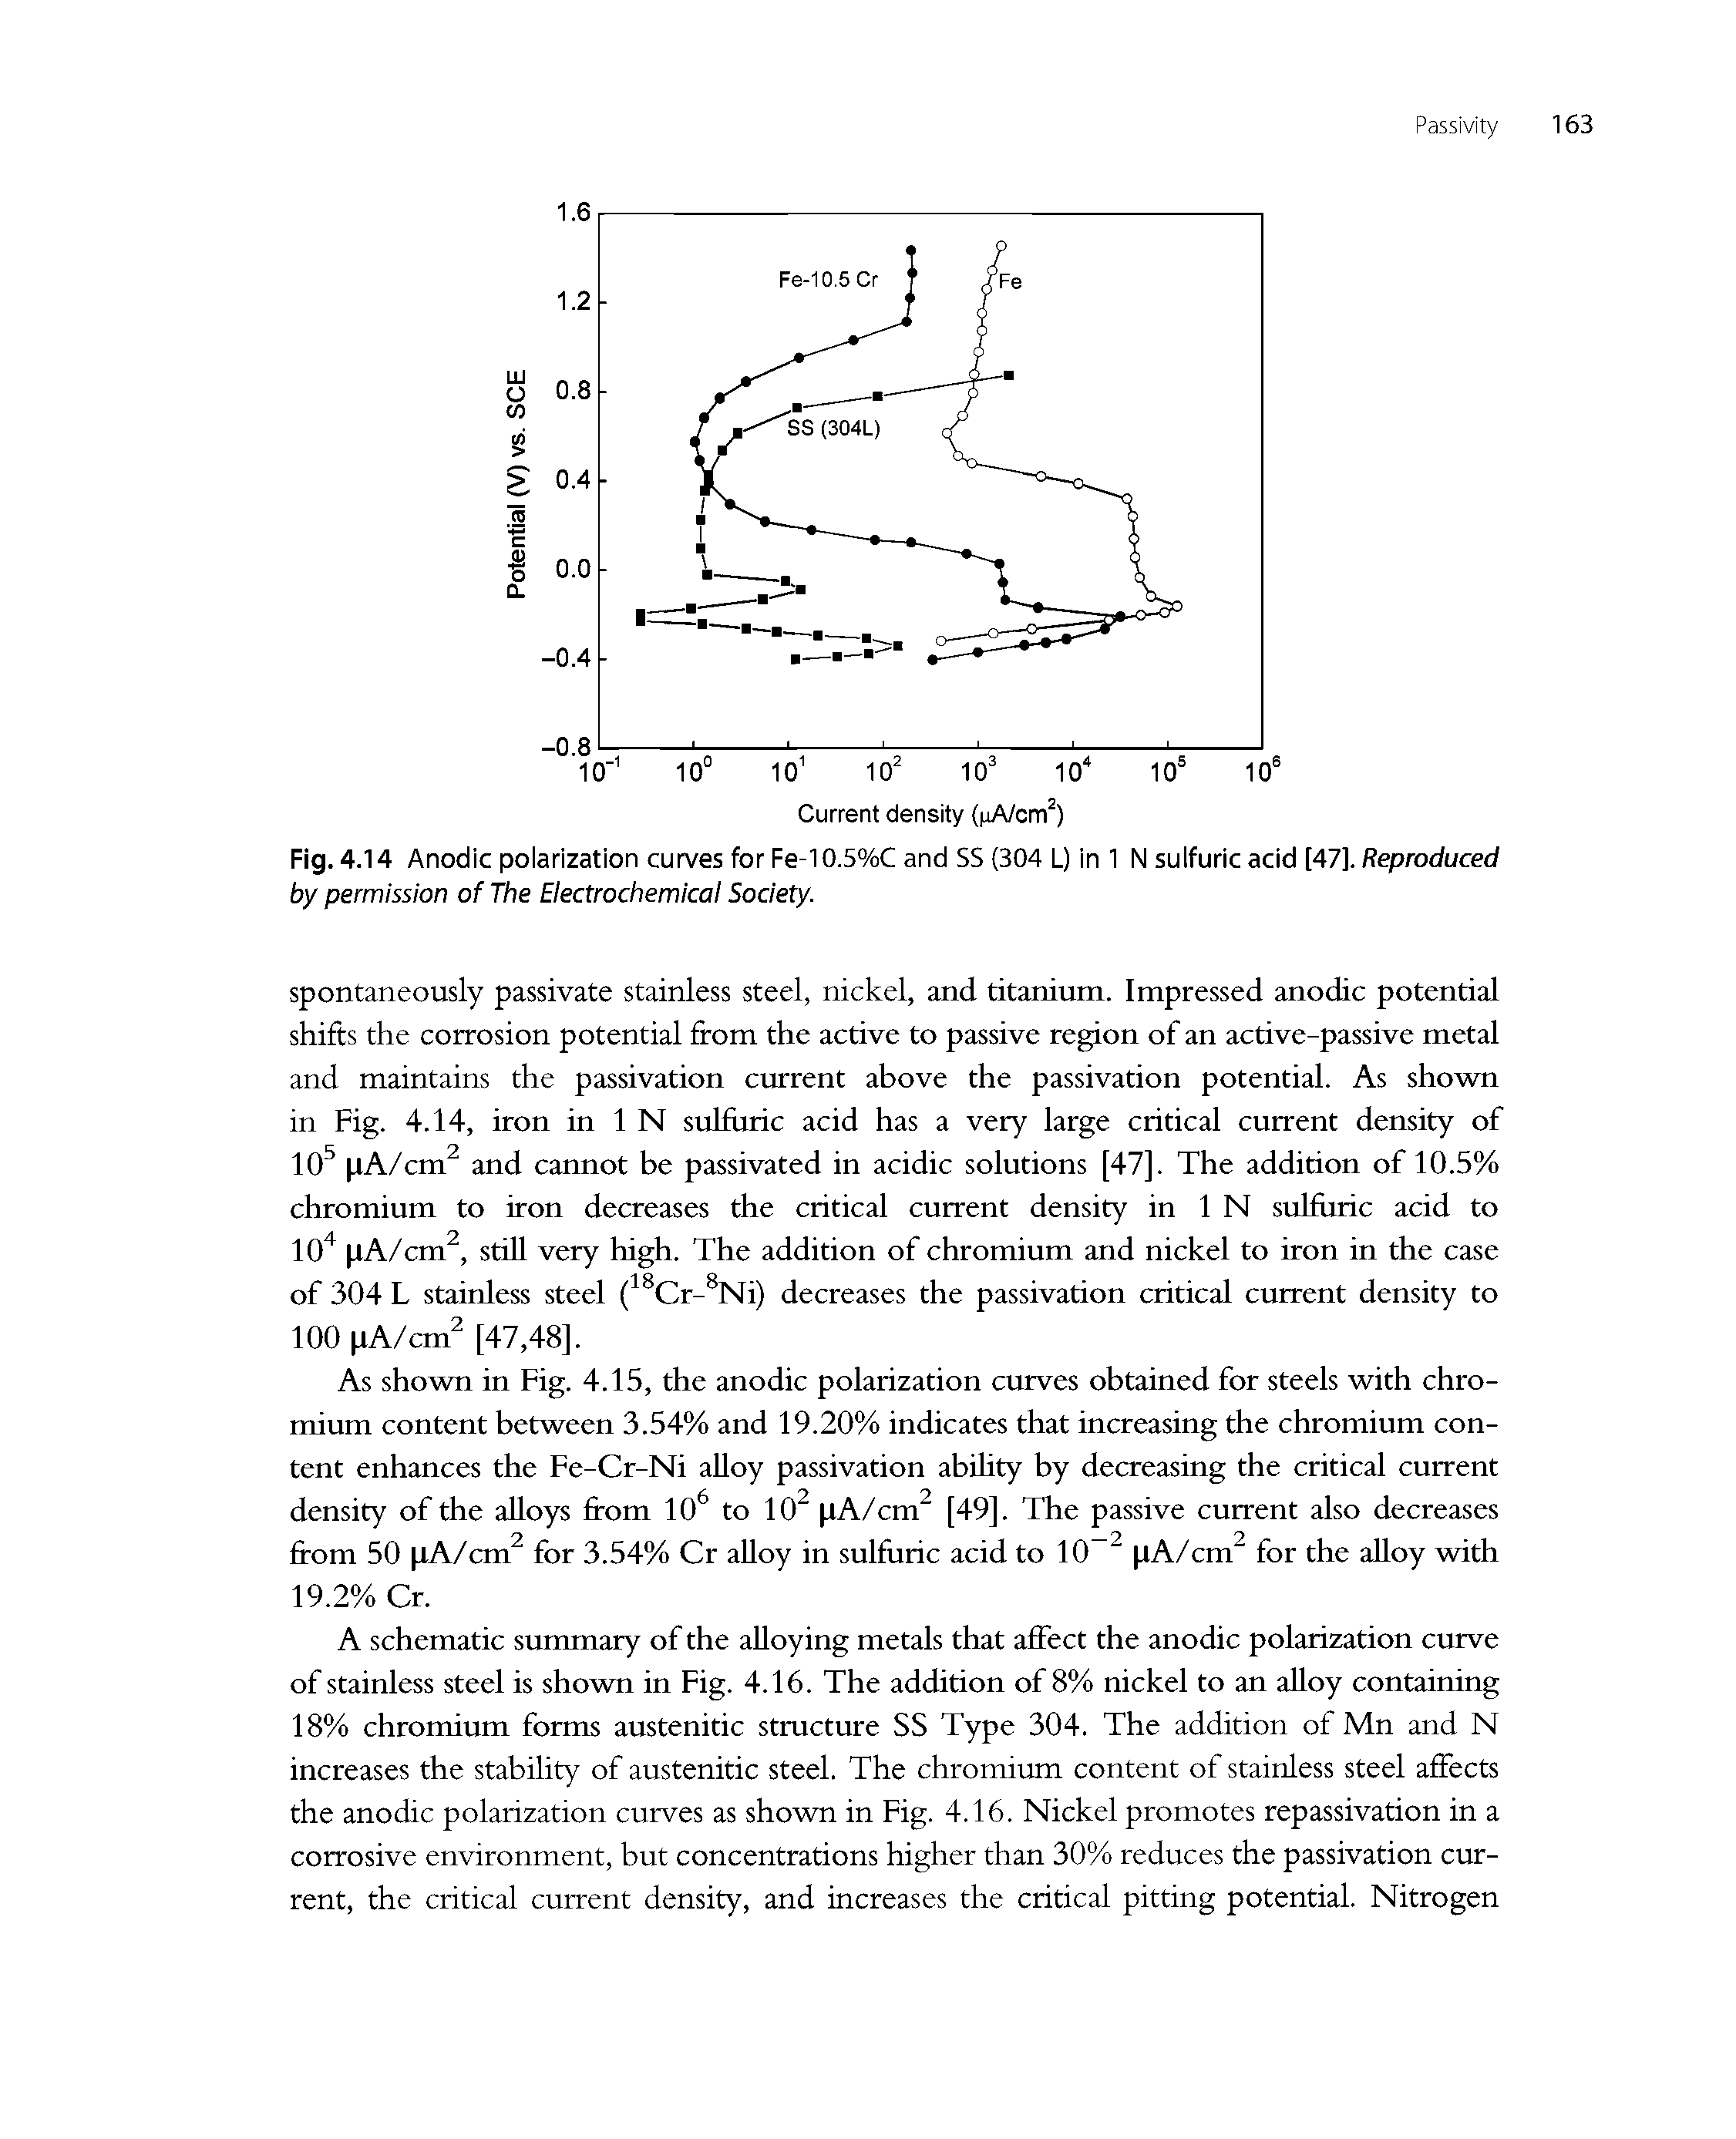 Fig. 4.14 Anodic polarization curves for Fe-10.5%C and SS (304 L) in 1 N sulfuric acid [47]. Reproduced...